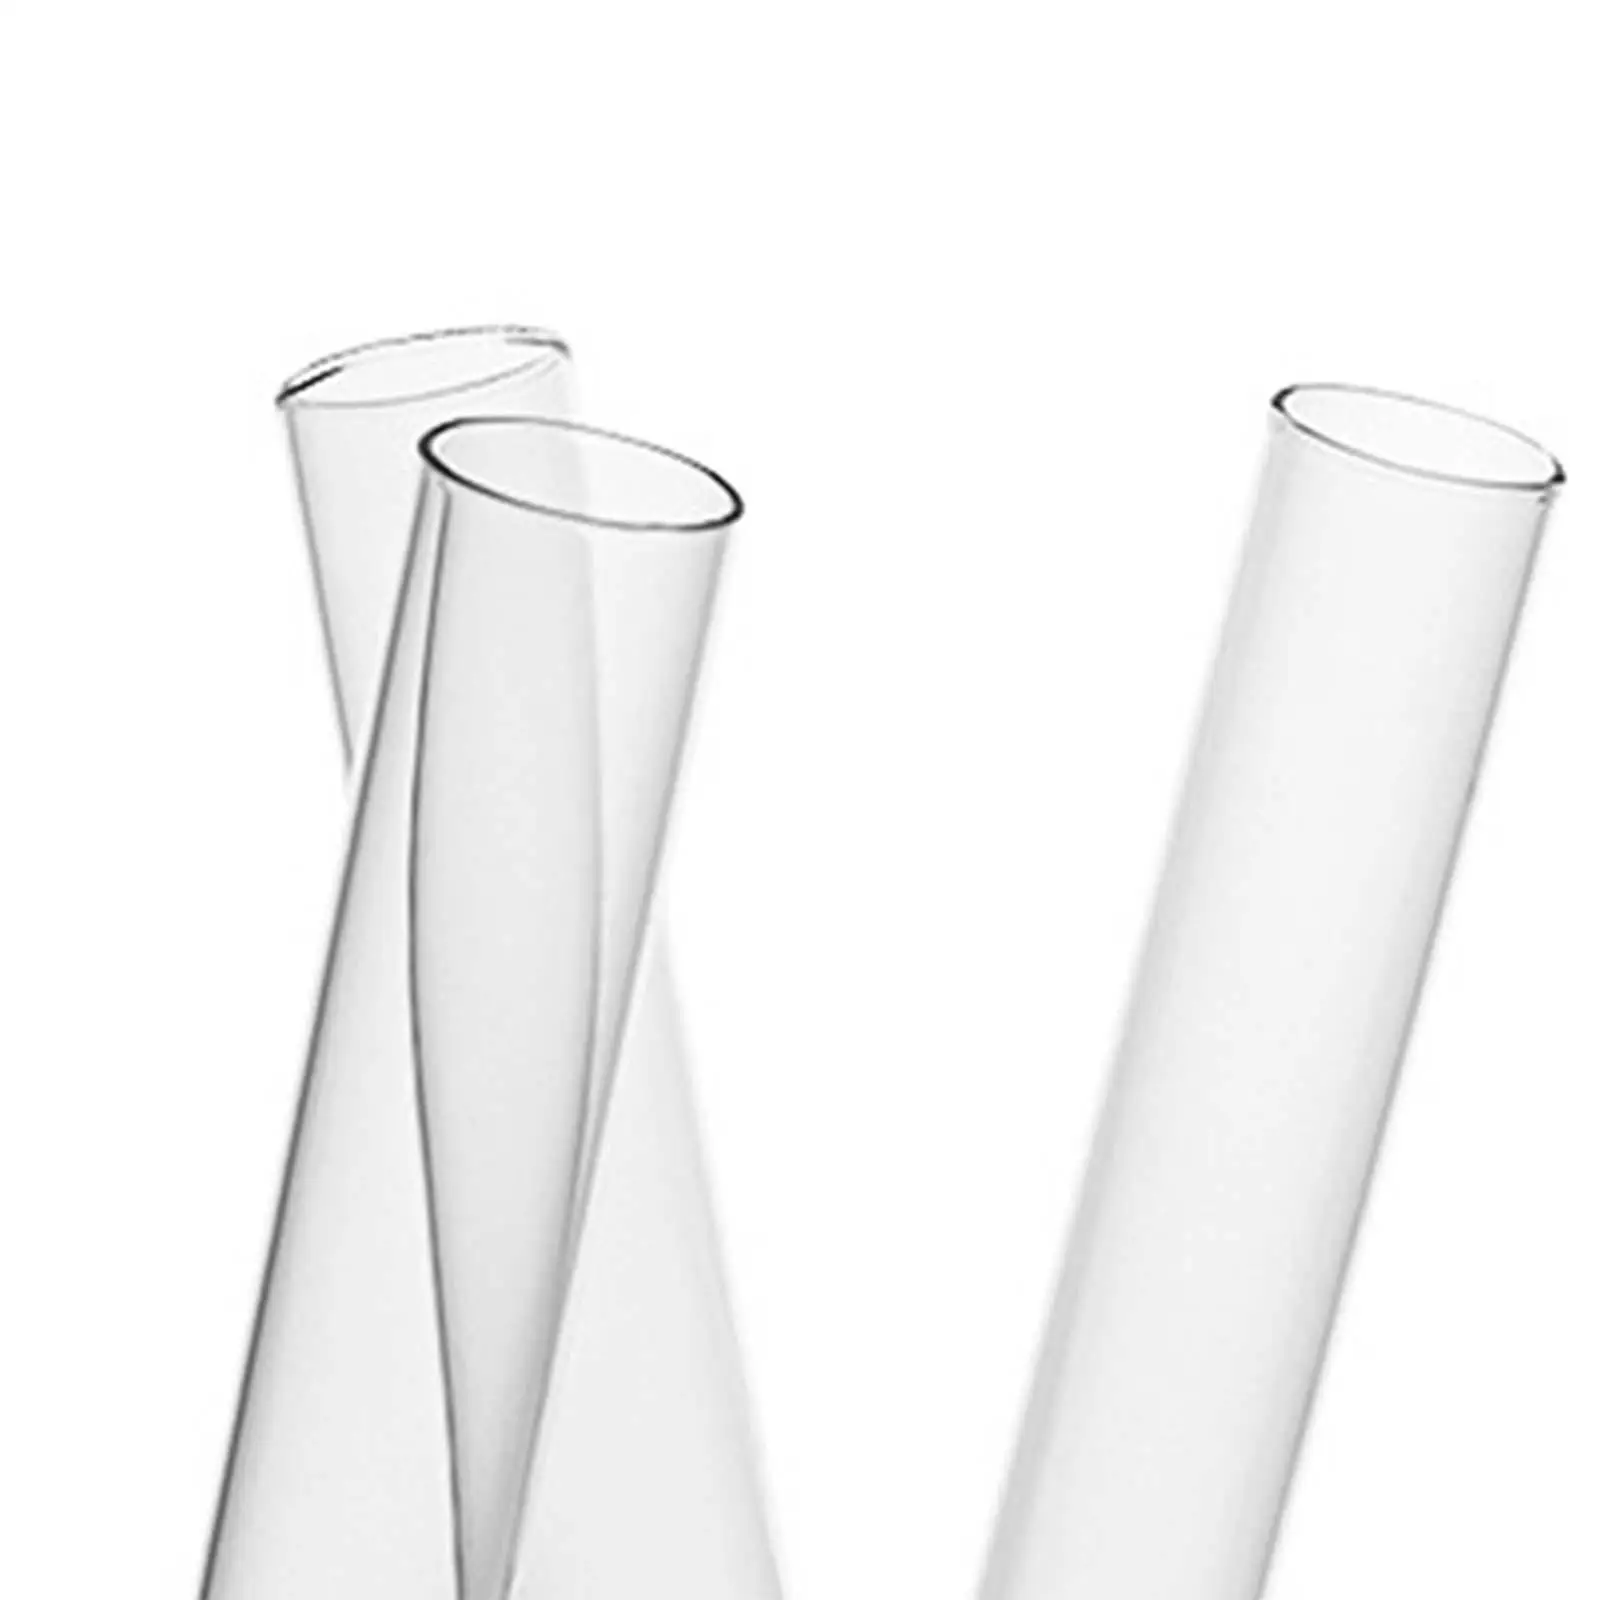 Test Tube Vases for Flowers with 3 Test Tubes Glass Fashion Planter Vase for Desk Cafe Office Party Dining Room